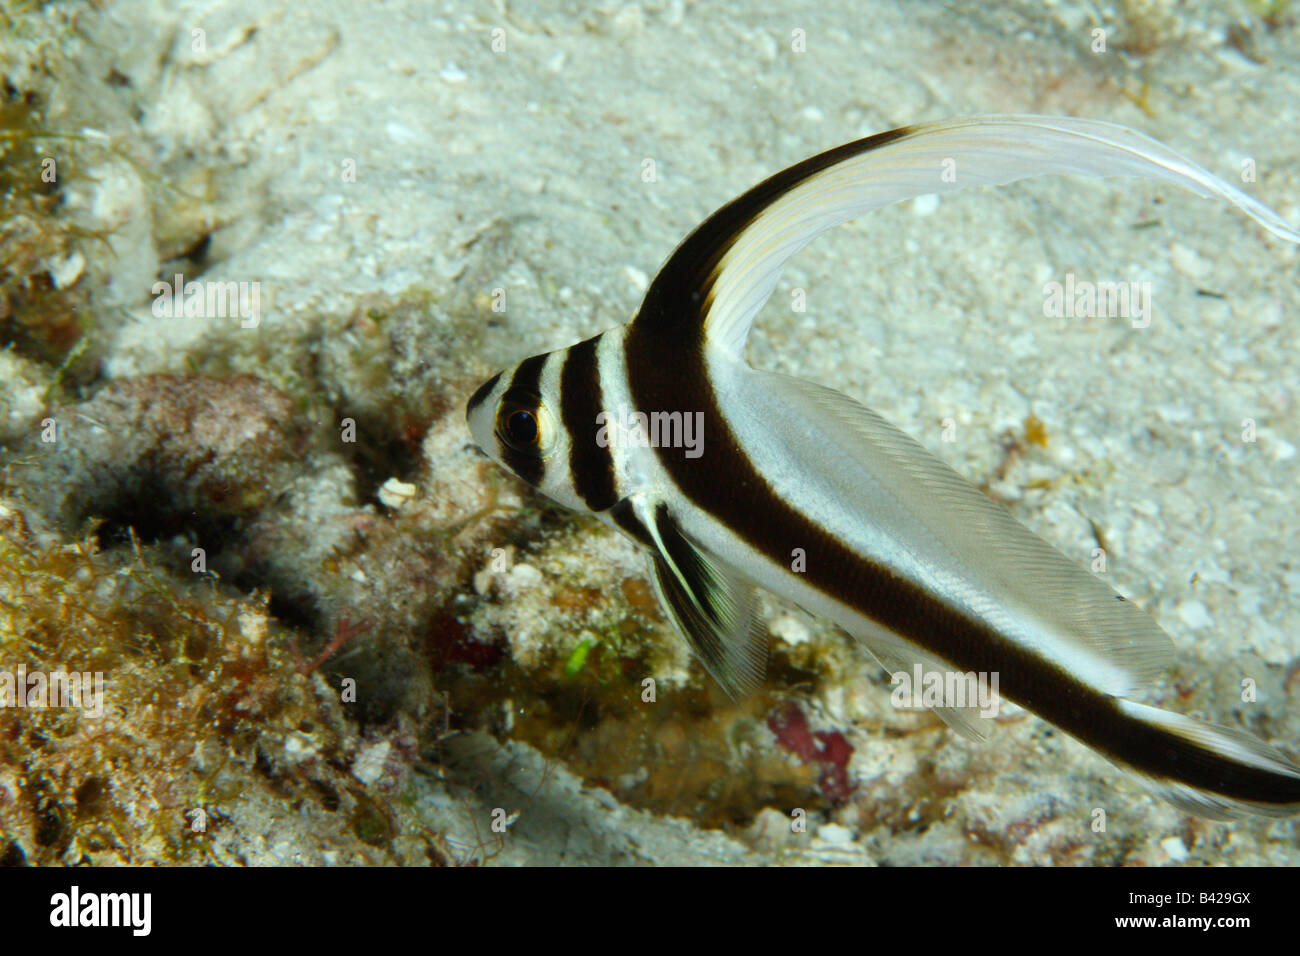 Juvenile Spotted Drum fish swimming on the coral reef. Stock Photo